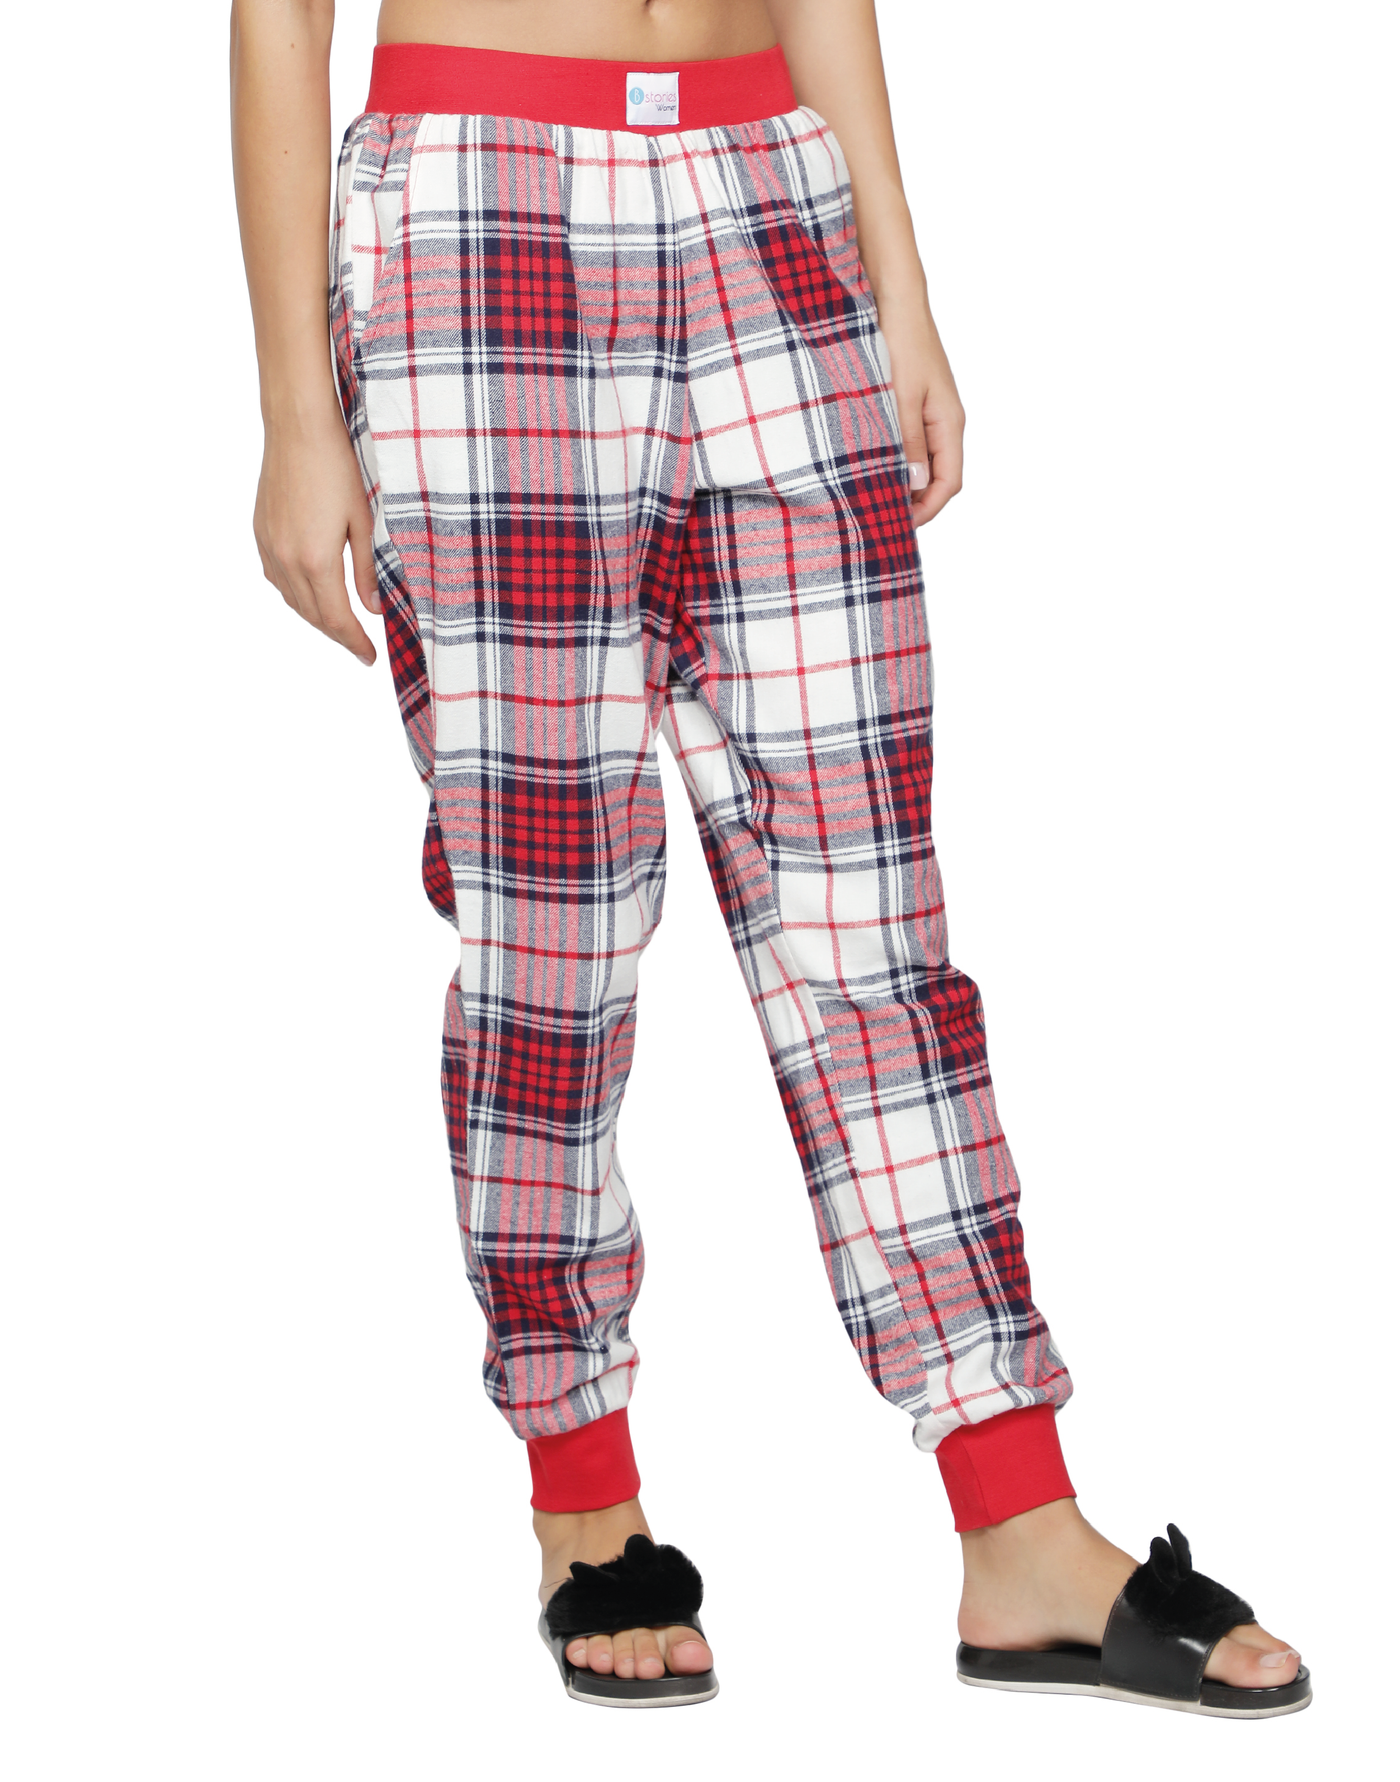 Lounge Pant for Women-Red & White Checked Jogger